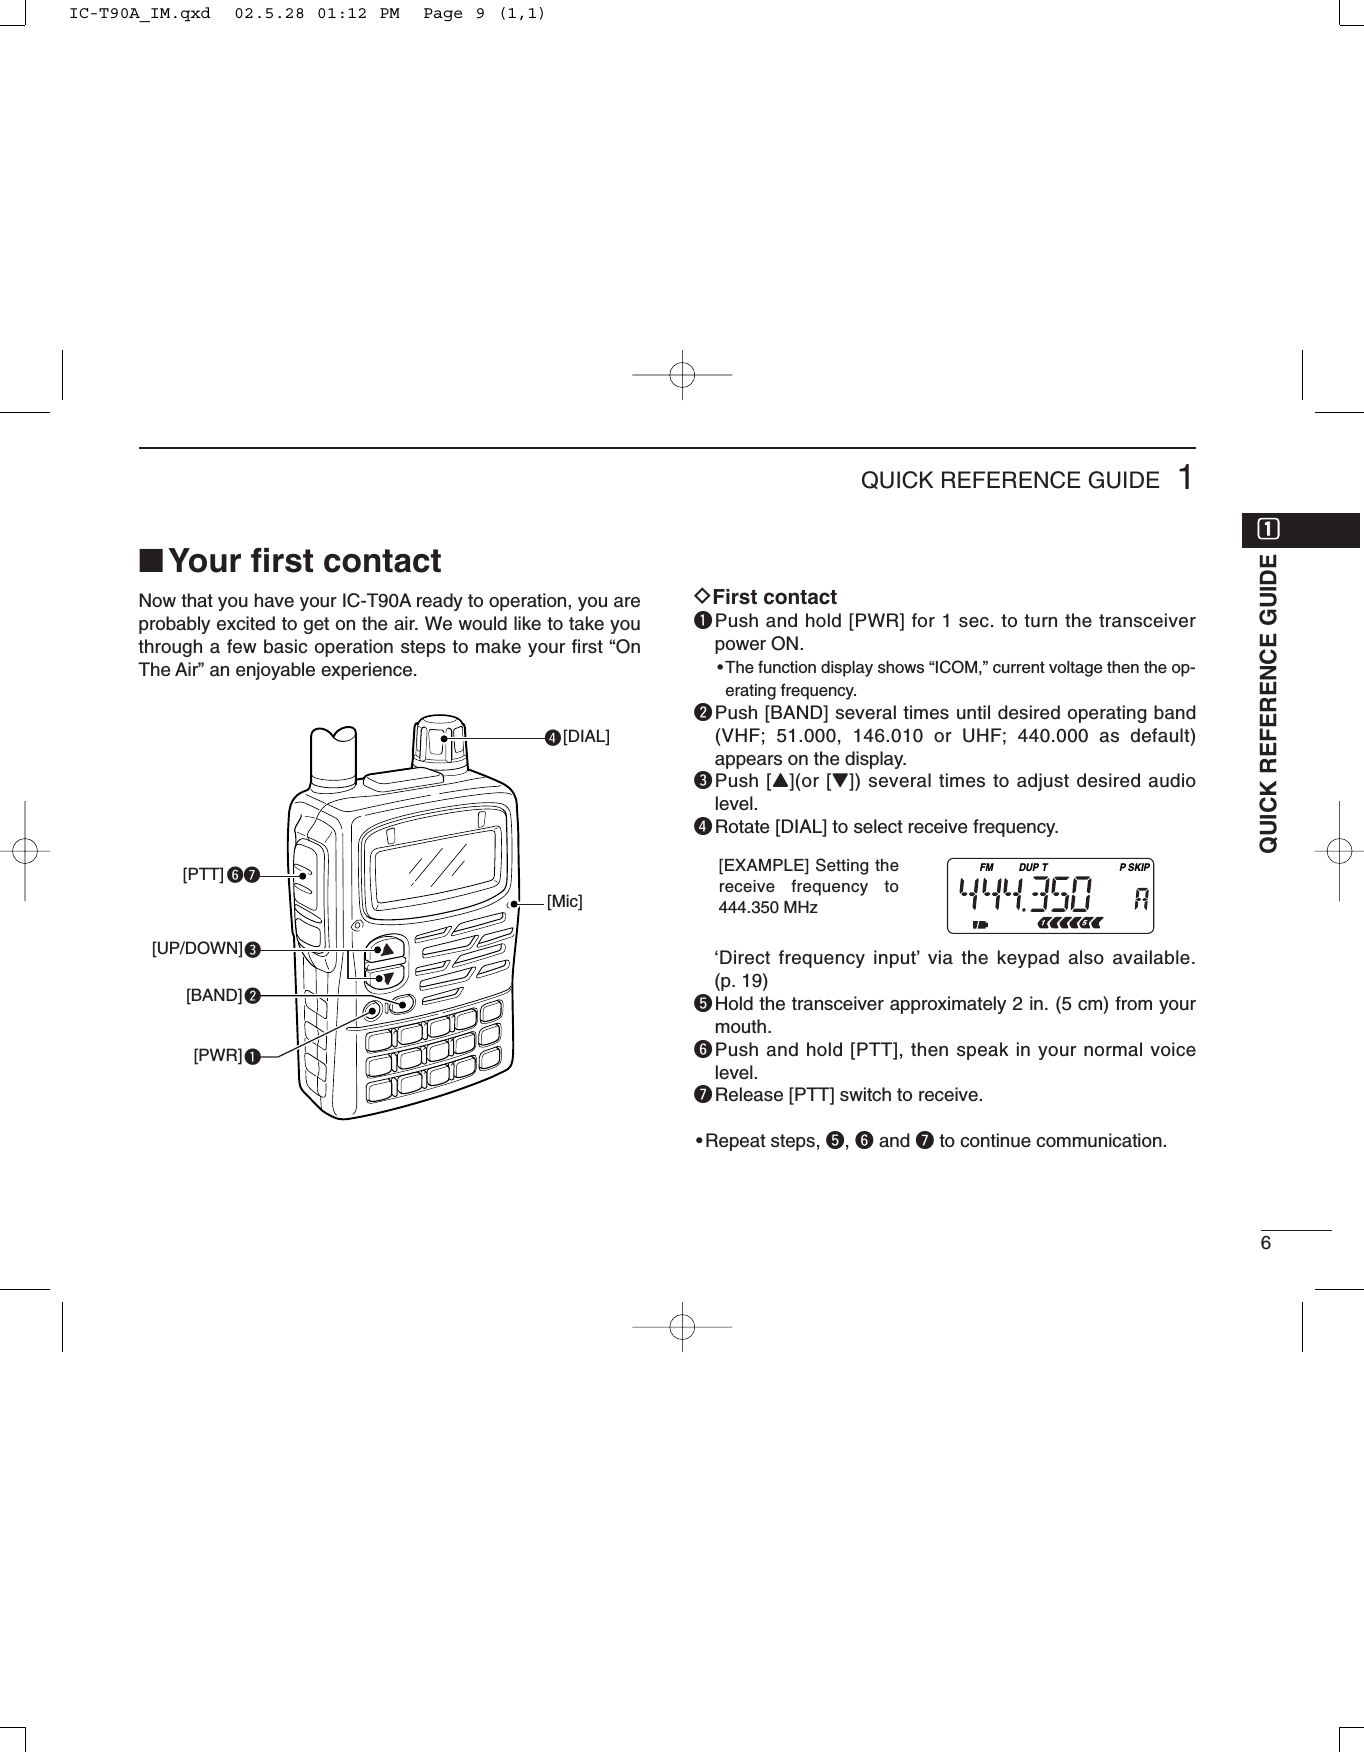 61QUICK REFERENCE GUIDE■Your ﬁrst contactNow that you have your IC-T90A ready to operation, you areprobably excited to get on the air. We would like to take youthrough a few basic operation steps to make your first “OnThe Air” an enjoyable experience. DFirst contactqPush and hold [PWR] for 1 sec. to turn the transceiverpower ON.•The function display shows “ICOM,” current voltage then the op-erating frequency.wPush [BAND] several times until desired operating band(VHF; 51.000, 146.010 or UHF; 440.000 as default)appears on the display.ePush [Y](or [Z]) several times to adjust desired audiolevel.rRotate [DIAL] to select receive frequency.‘Direct frequency input’via the keypad also available. (p. 19)tHold the transceiver approximately 2 in. (5 cm) from yourmouth.yPush and hold [PTT], then speak in your normal voicelevel.uRelease [PTT] switch to receive.•Repeat steps, t, yand uto continue communication.reqwyu[DIAL][PTT][UP/DOWN][BAND][PWR][Mic]QUICK REFERENCE GUIDEFM DUP SKIPTP[EXAMPLE] Setting thereceive frequency to444.350 MHzqqIC-T90A_IM.qxd  02.5.28 01:12 PM  Page 9 (1,1)